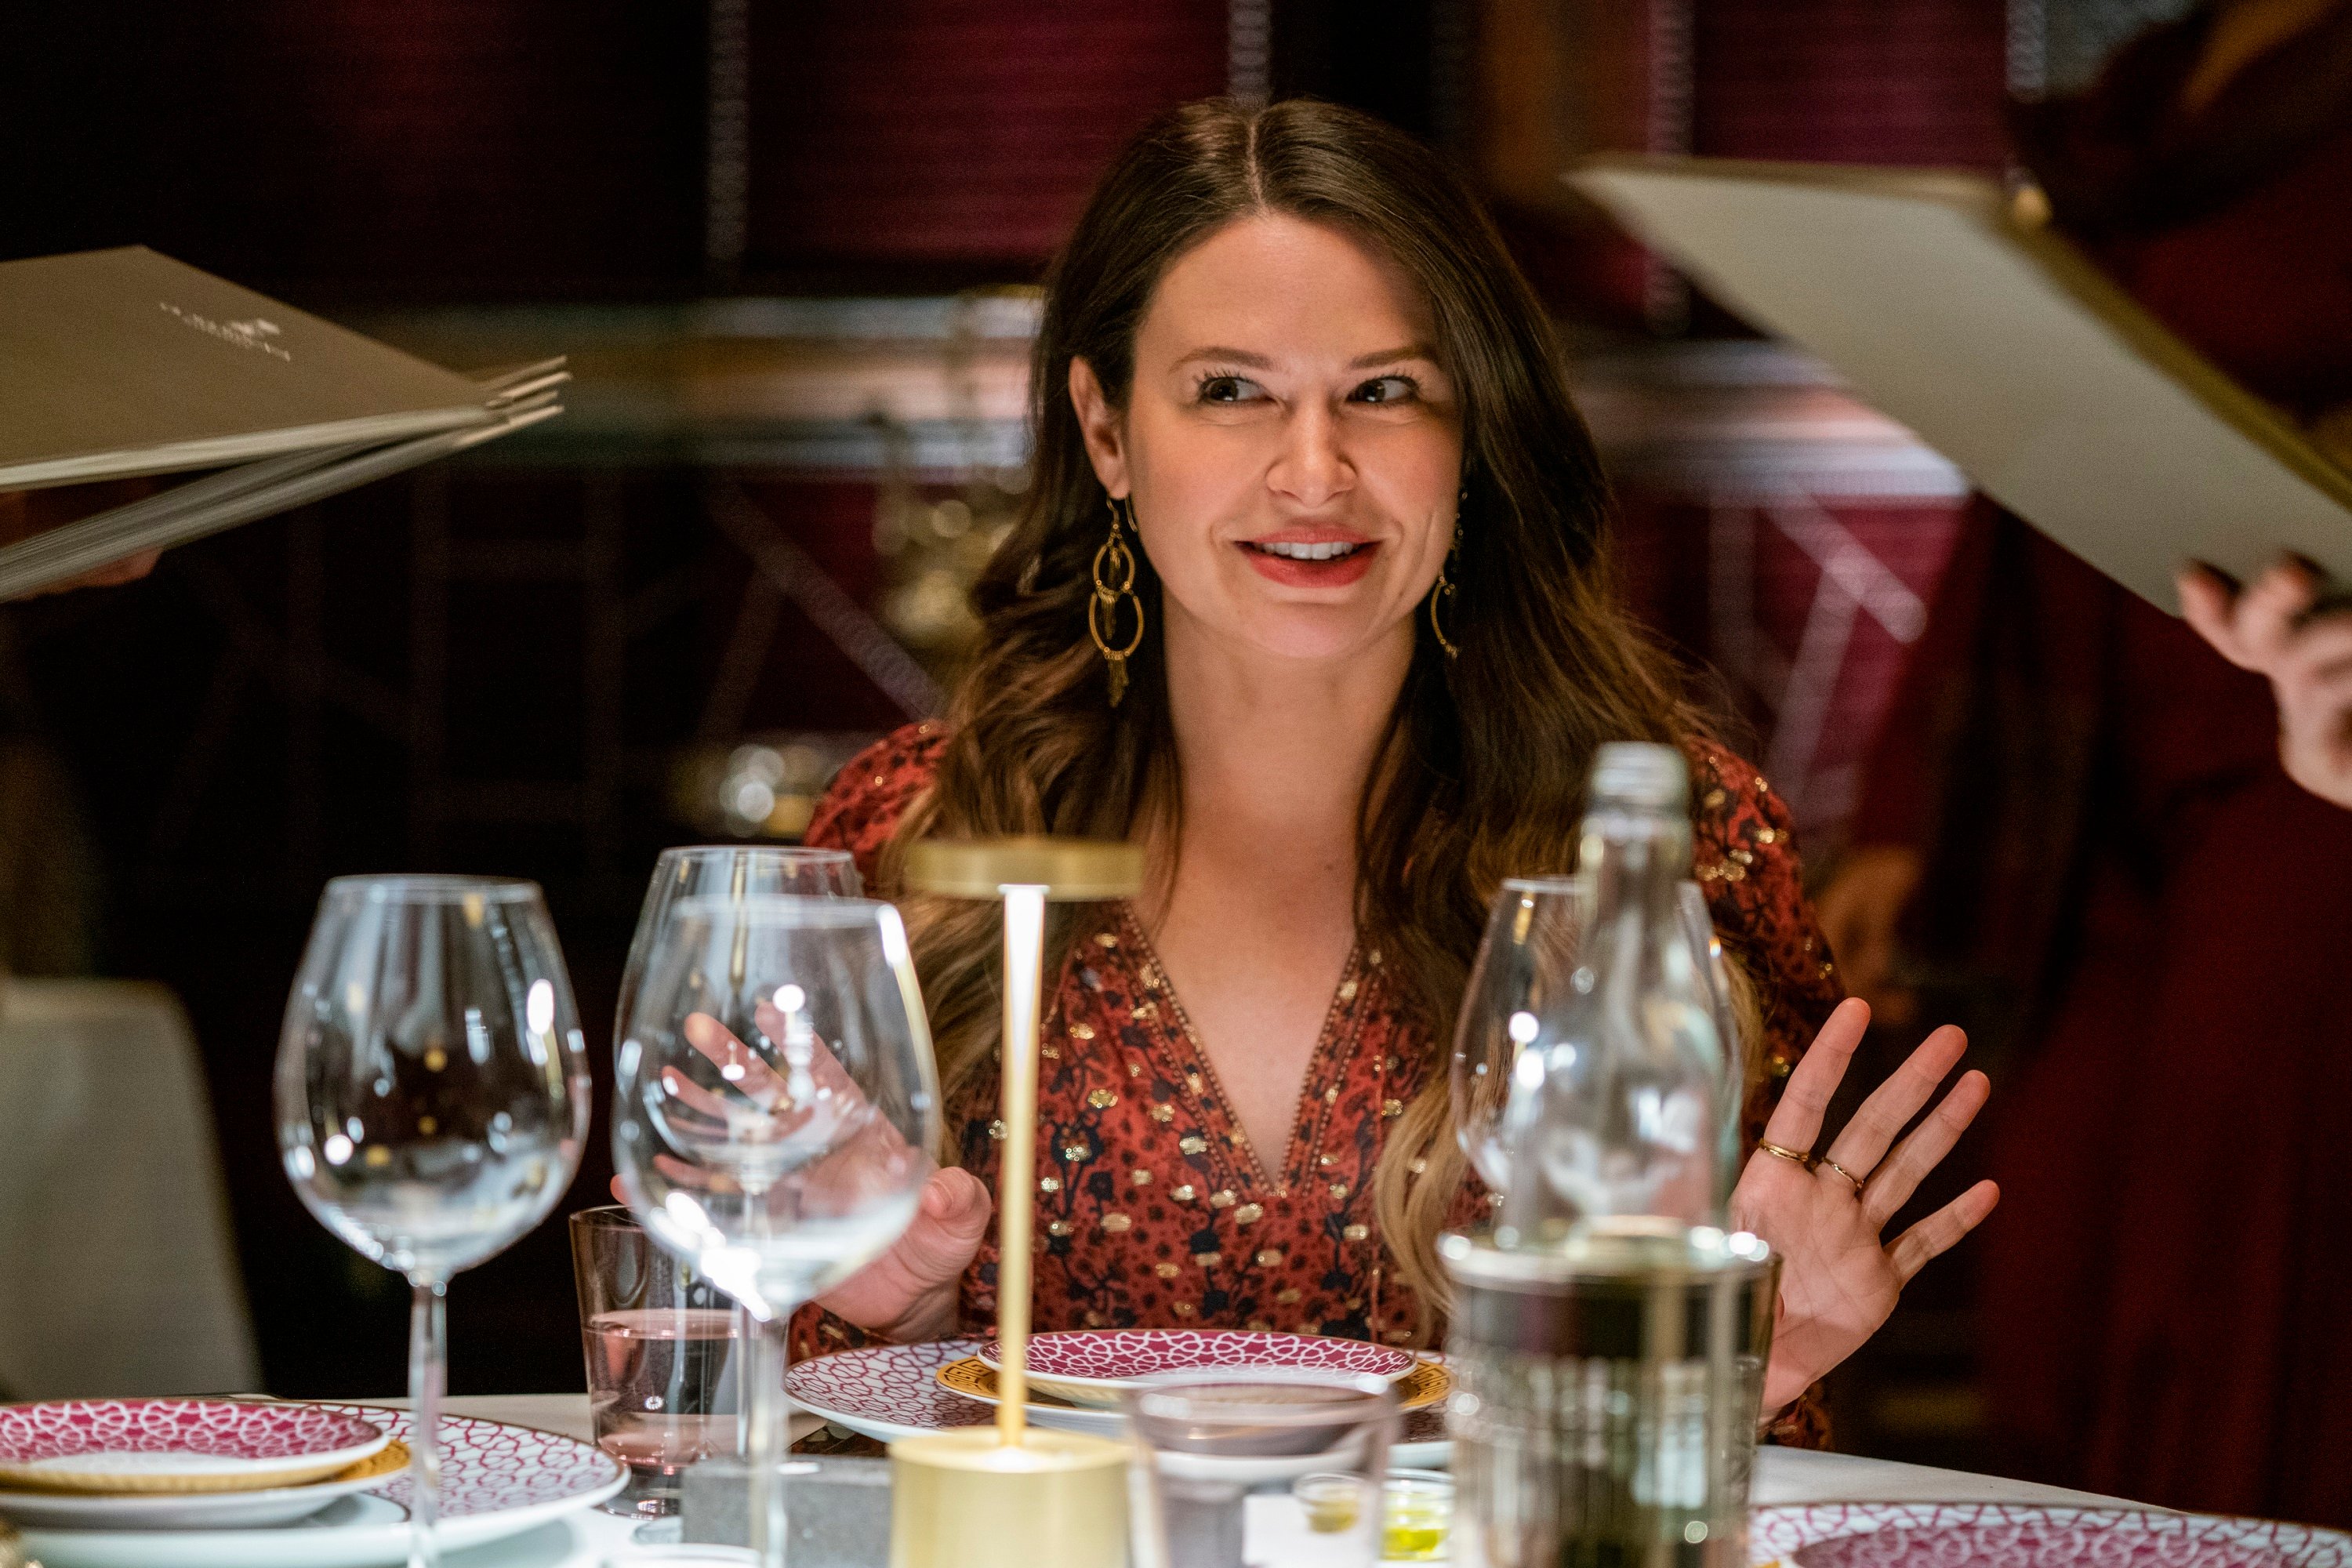 'Inventing Anna' cast member Katie Lowes portrays Rachel Williams with her hands up in front of several glasses